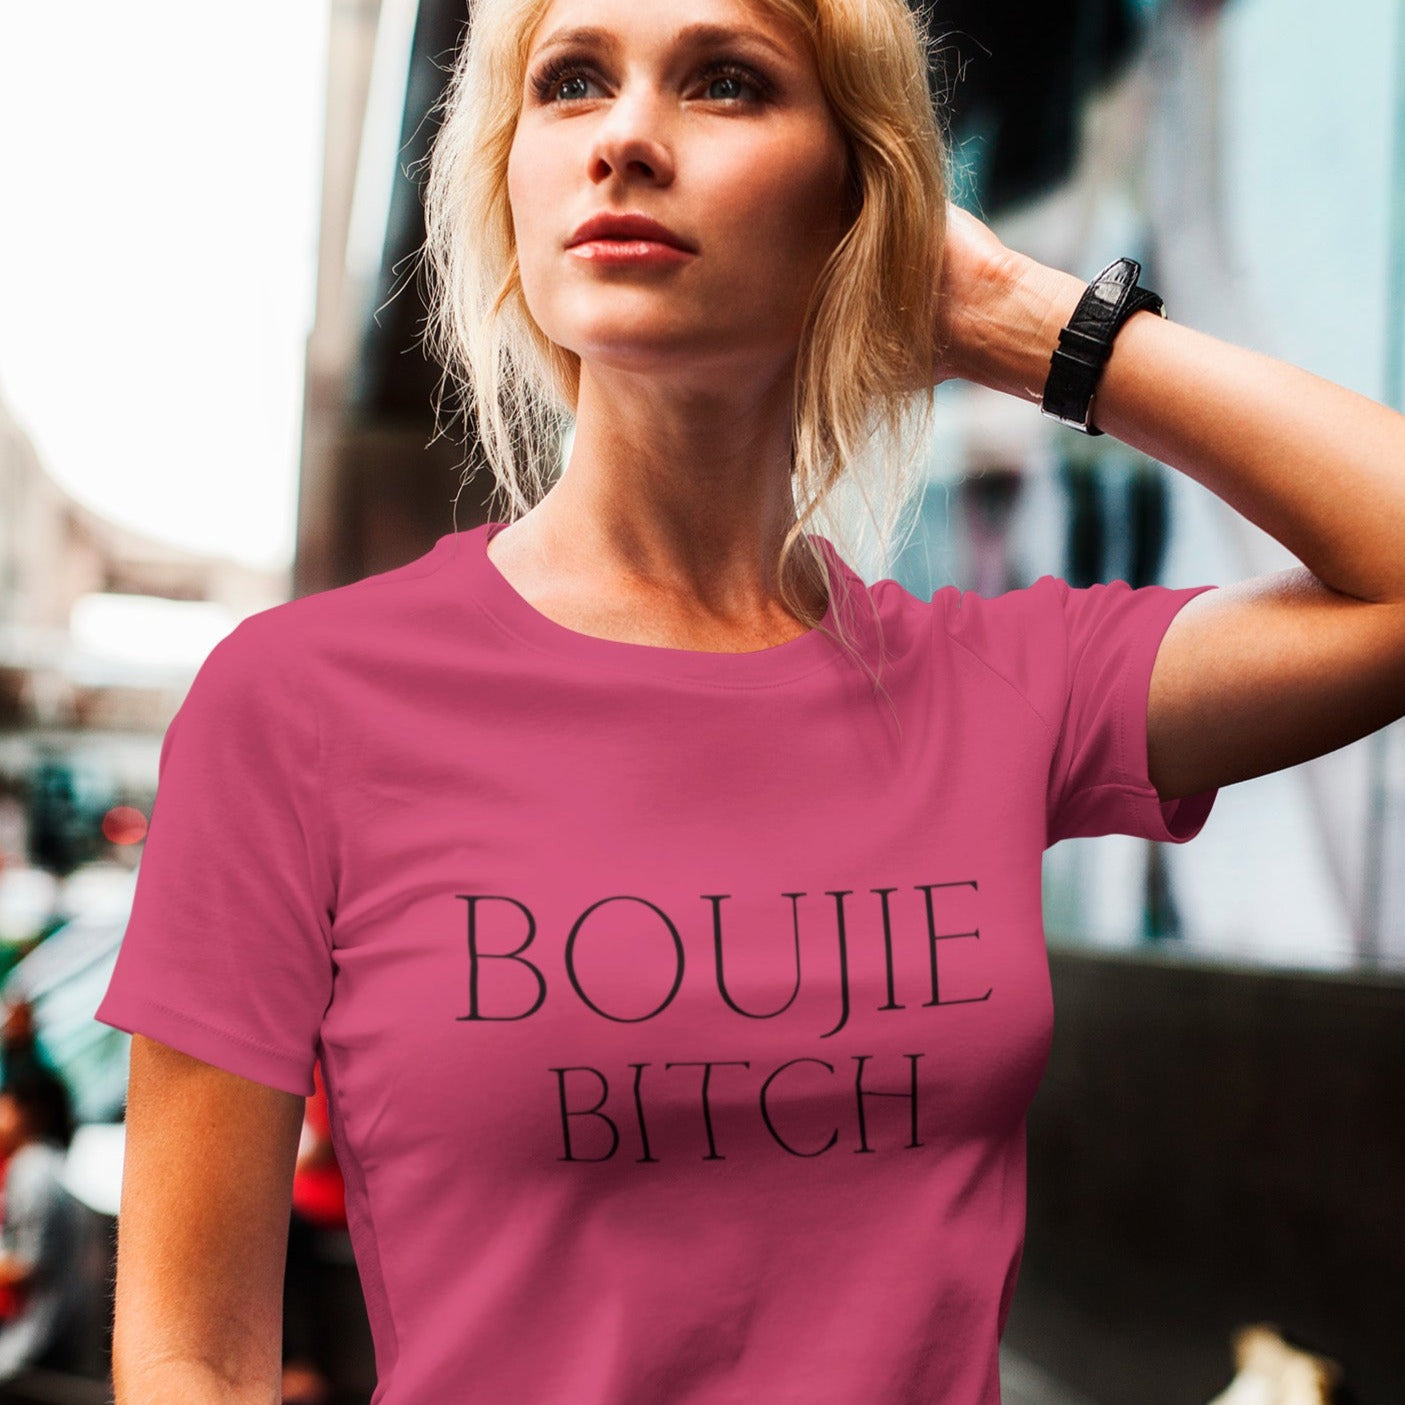 boujie-bitch-bourgeois-berry-t-shirt-womens-mockup-of-a-woman-posing-with-a-t-shirt-in-the